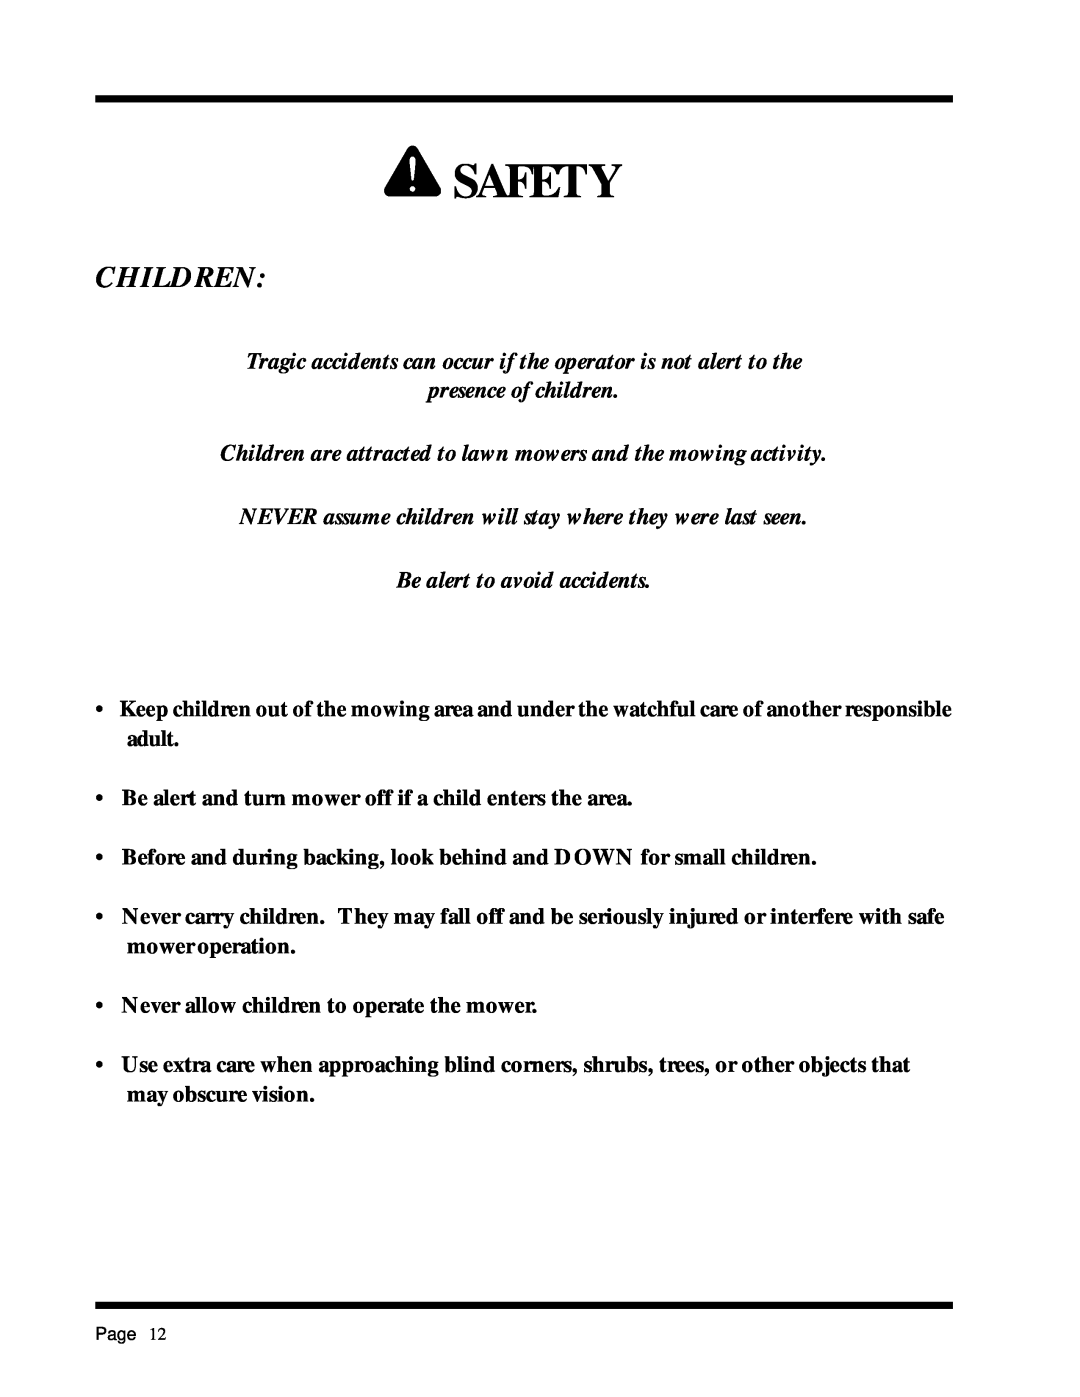 Dixon ZTR 2301 Children, Tragic accidents can occur if the operator is not alert to the, presence of children, Safety 